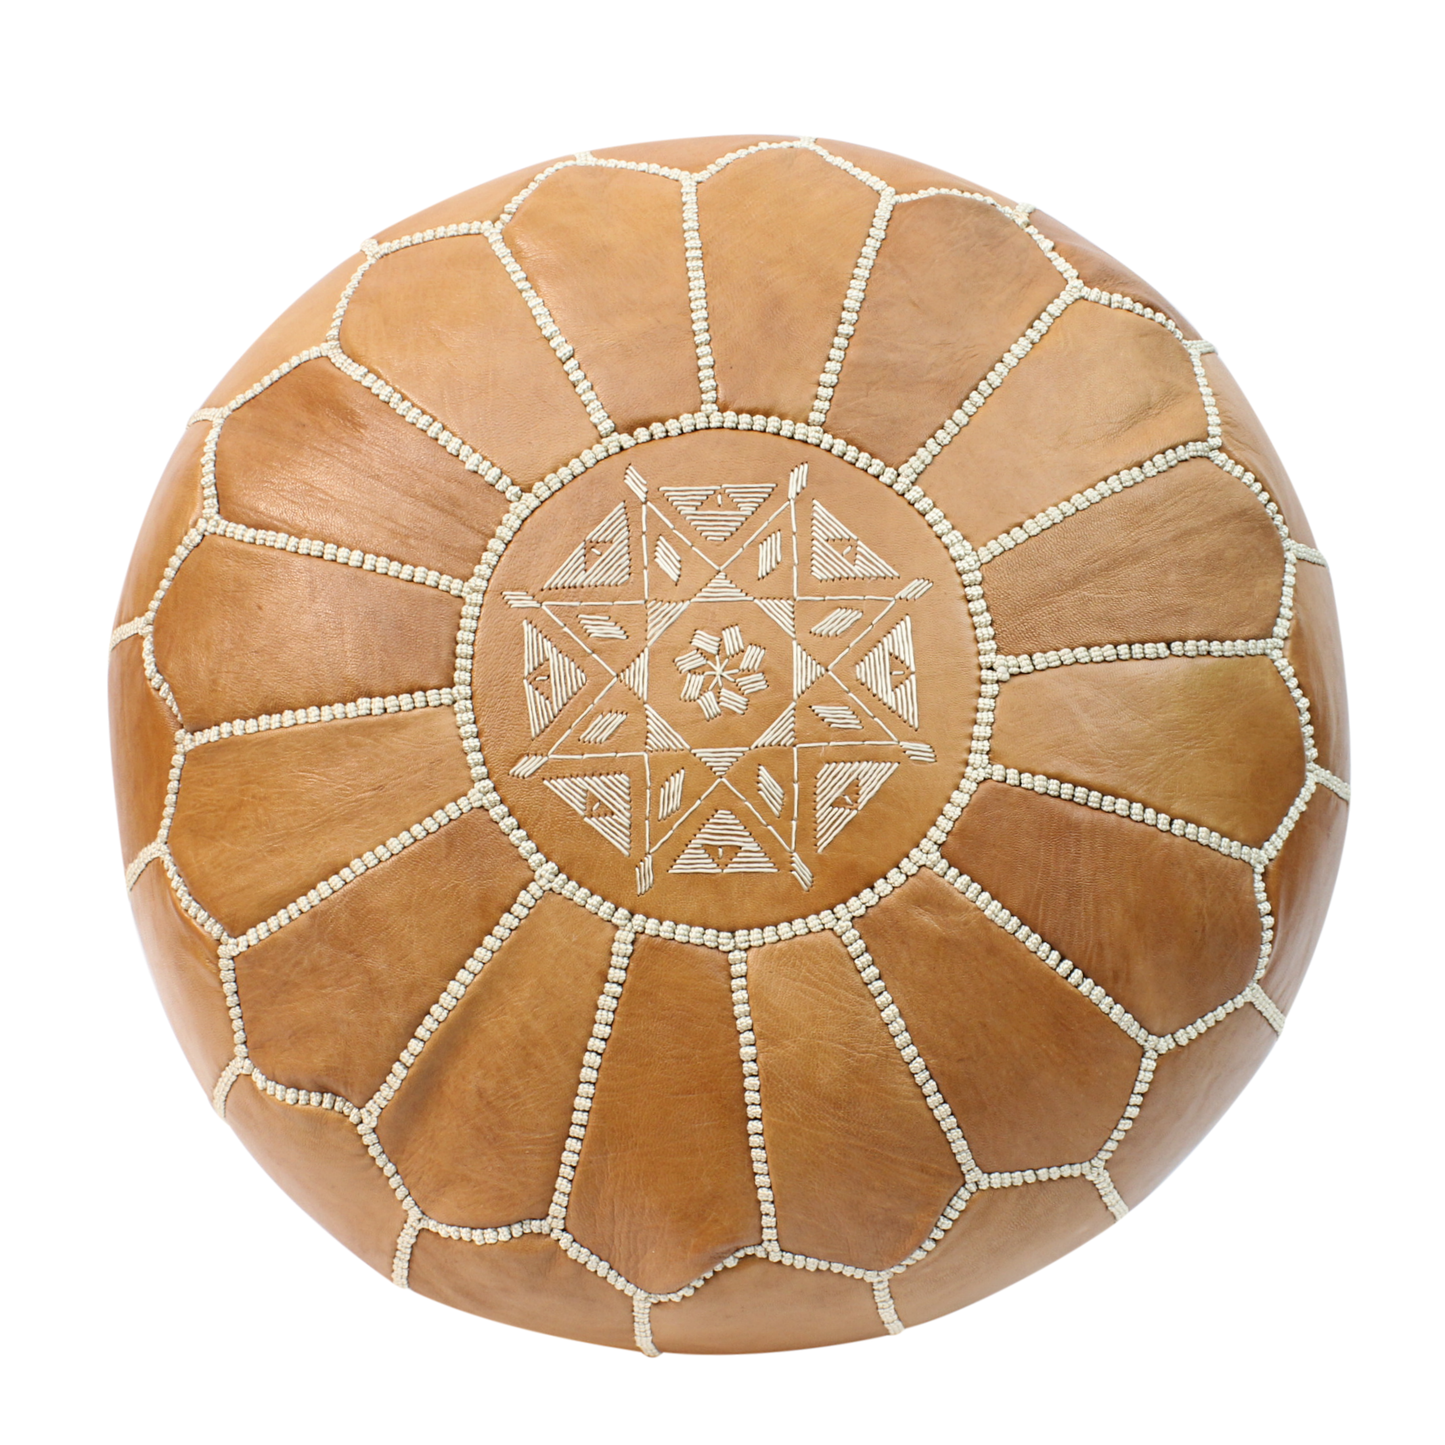 Moroccan Pouffe Pouf Ottoman Footstool RAK2 COVER ONLY or STUFFED Genuine Natural Tan Leather